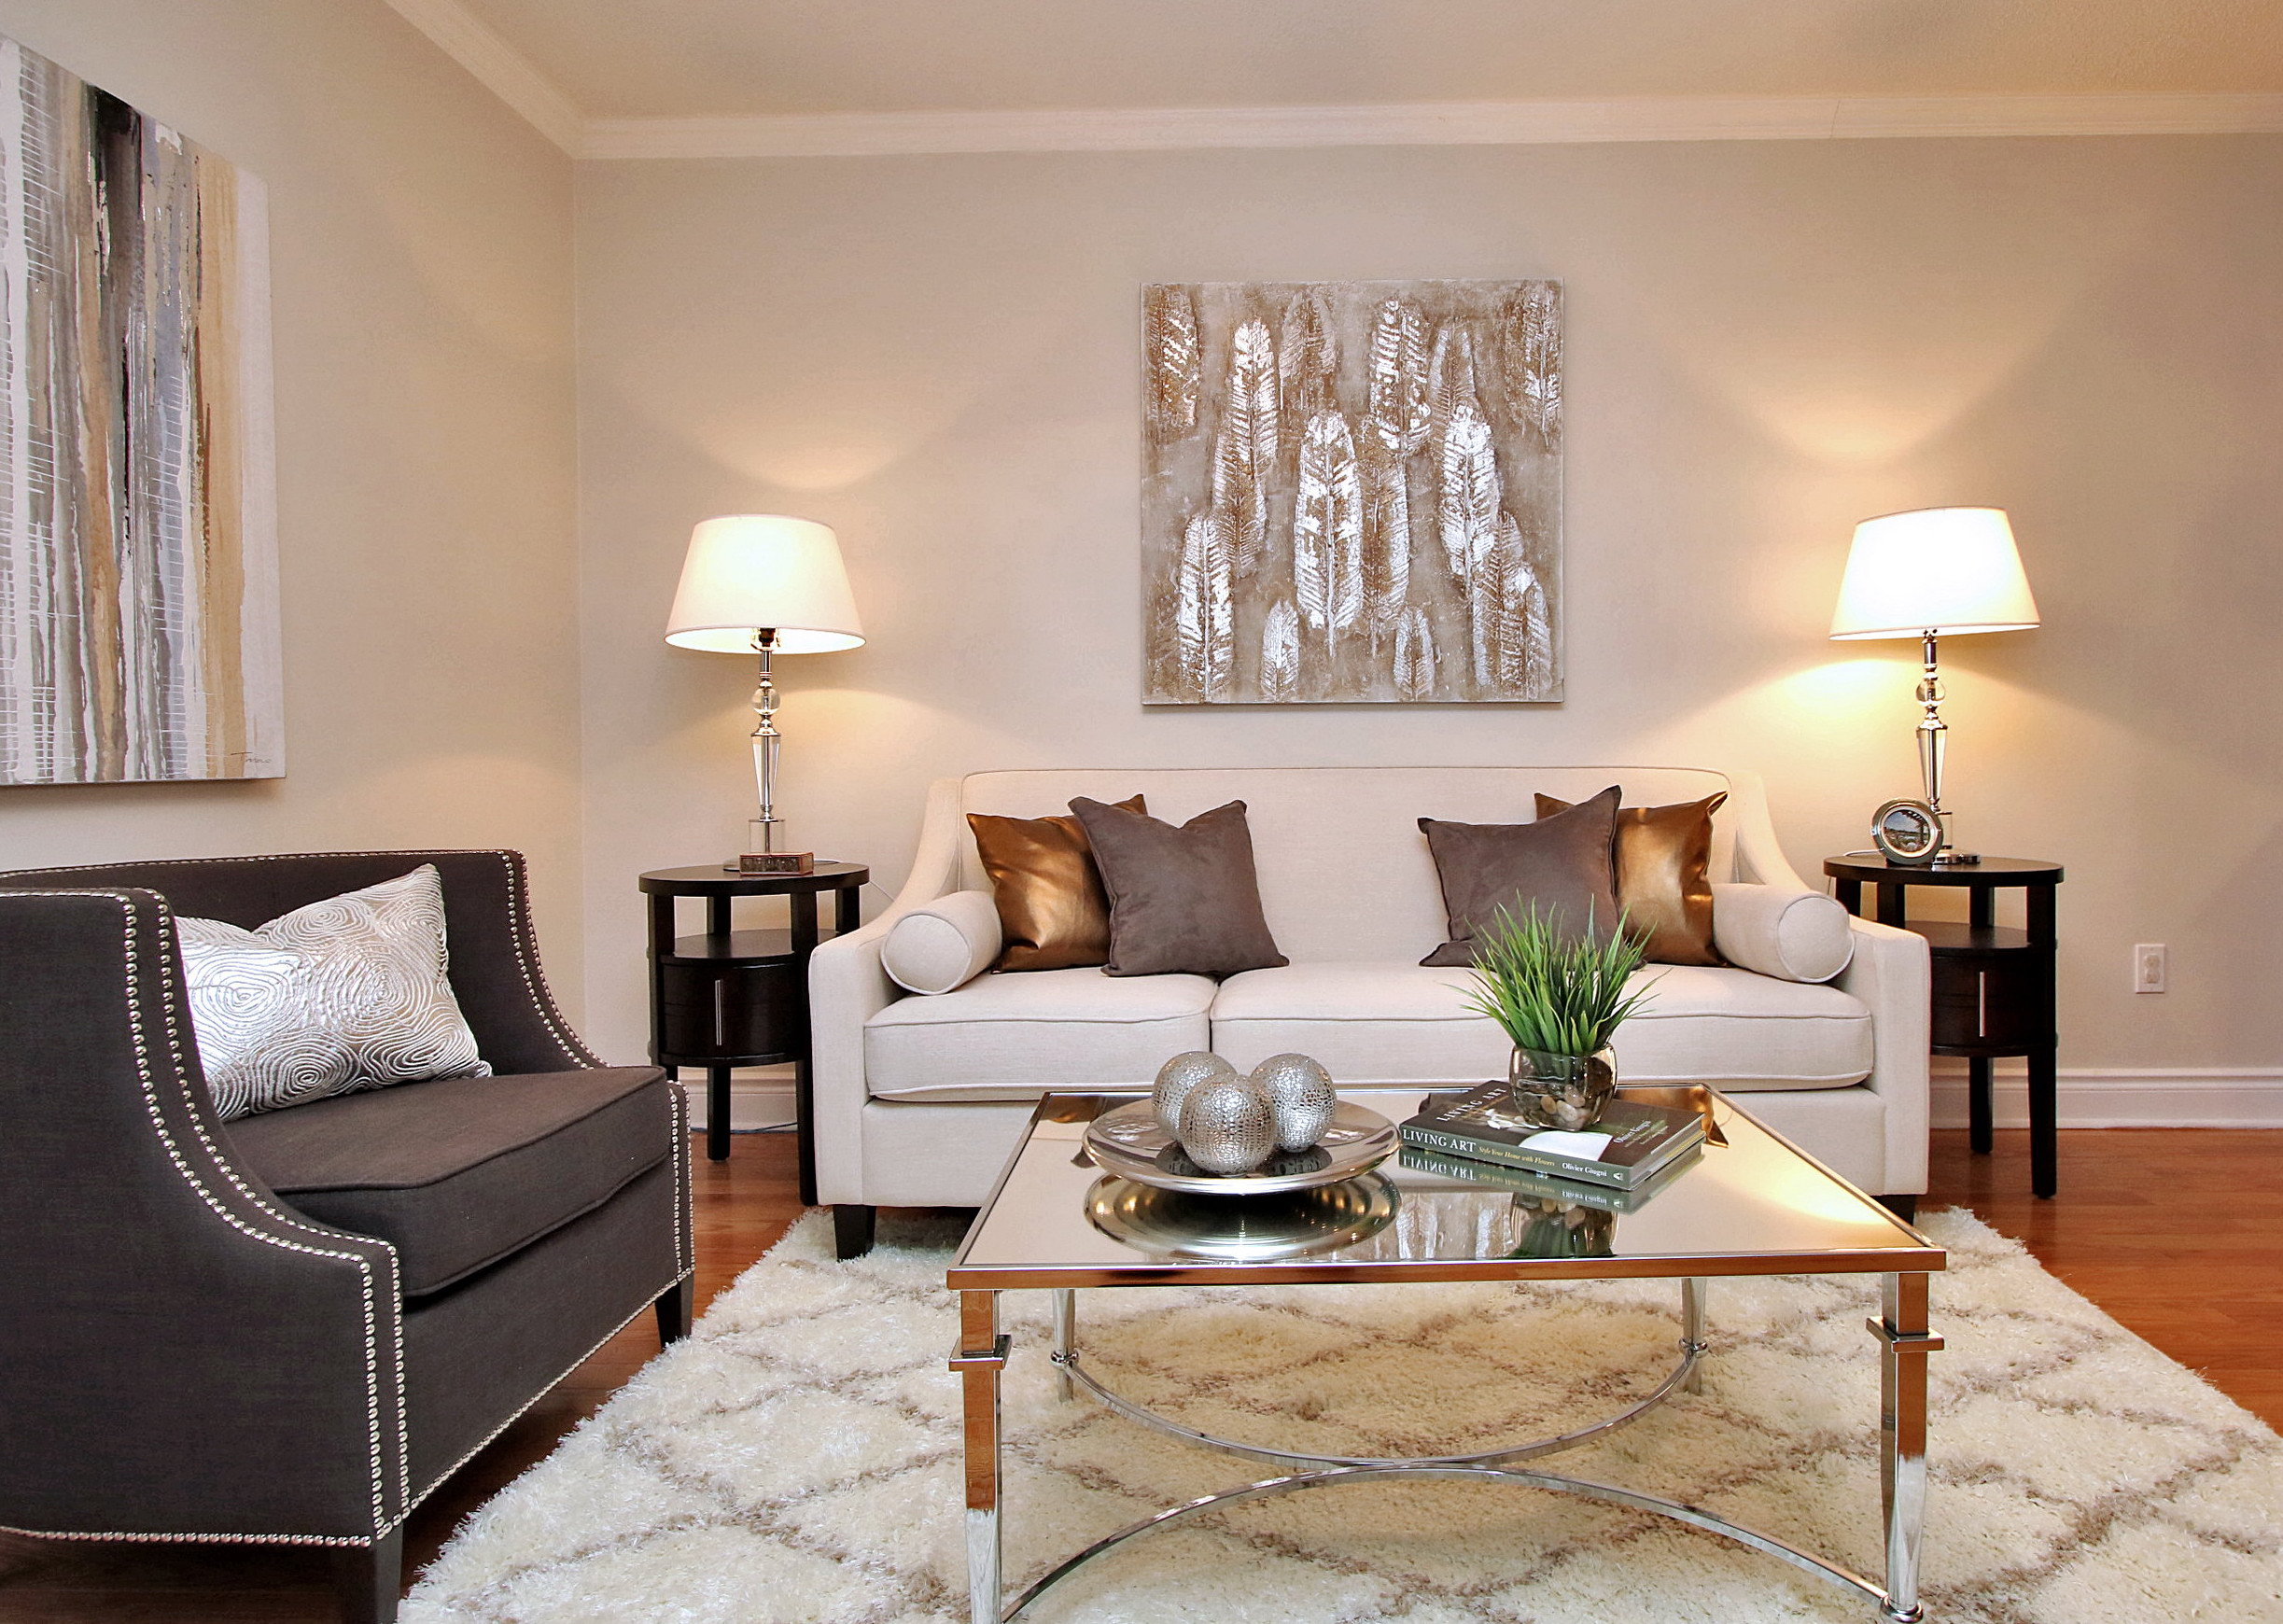 Home staged with rental furniture